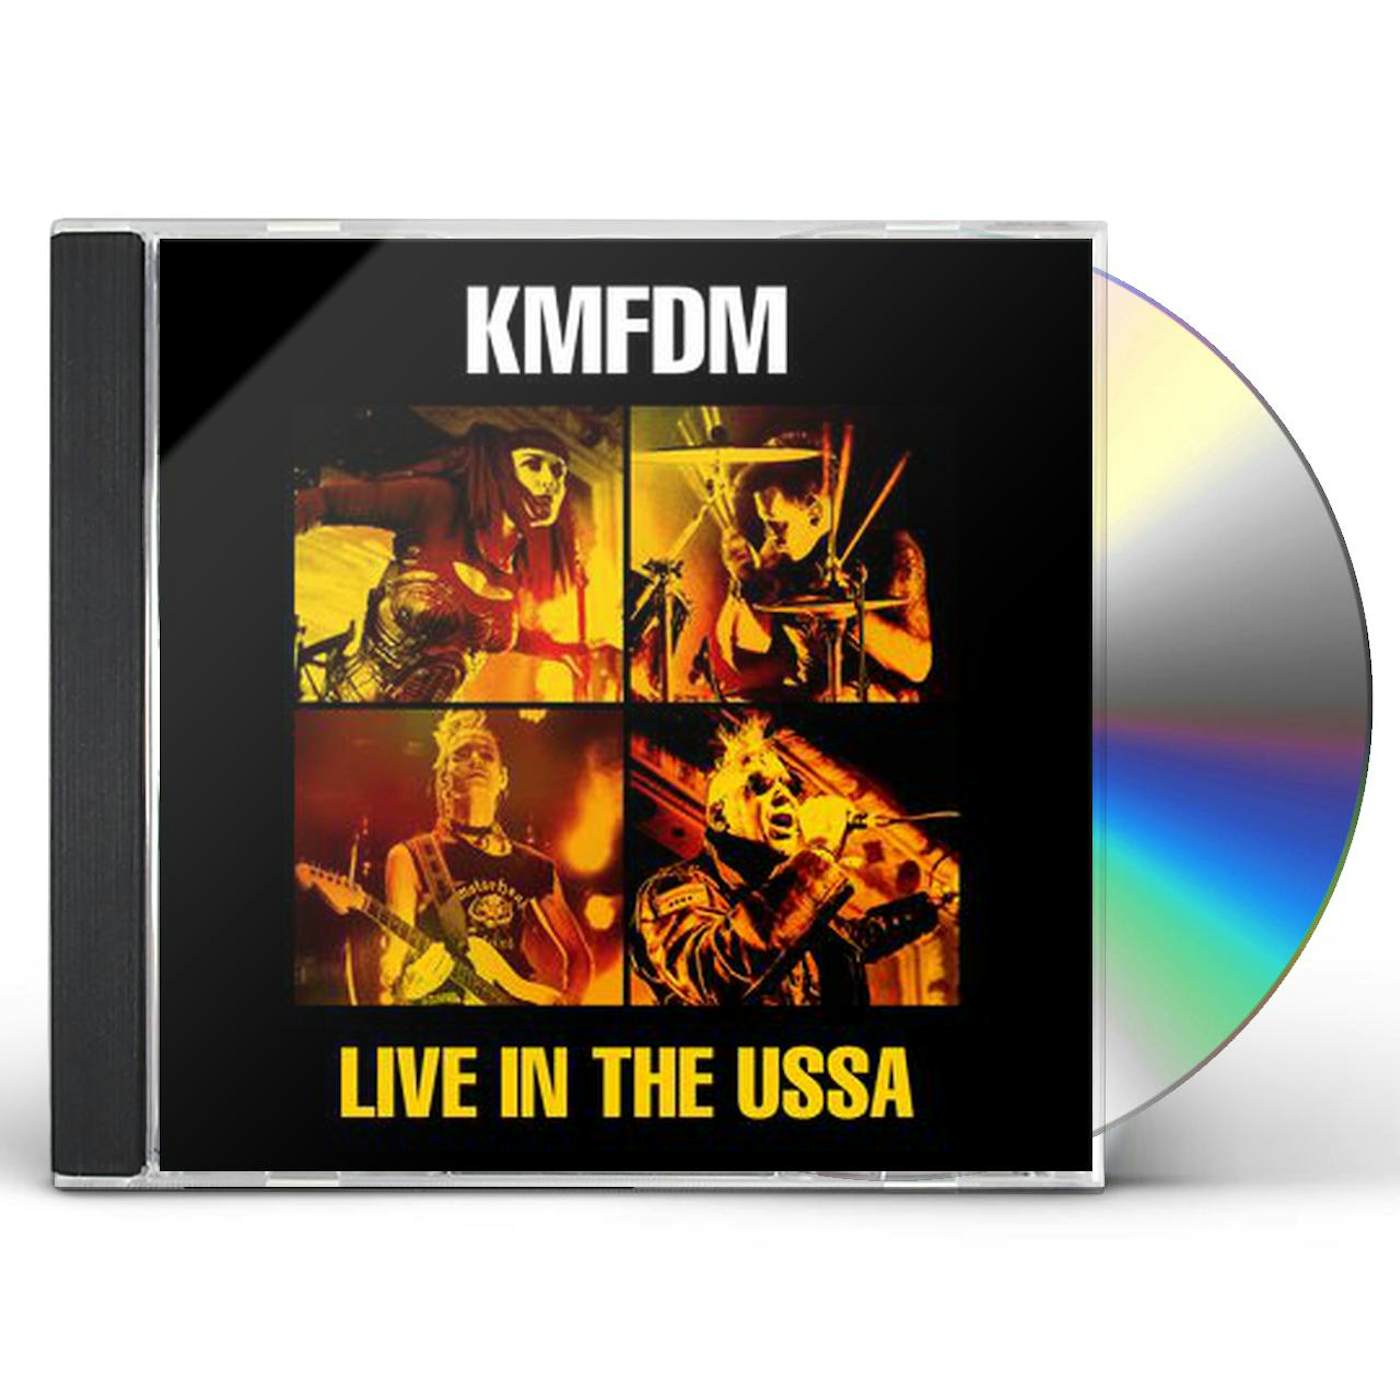 KMFDM LIVE IN THE USSA CD